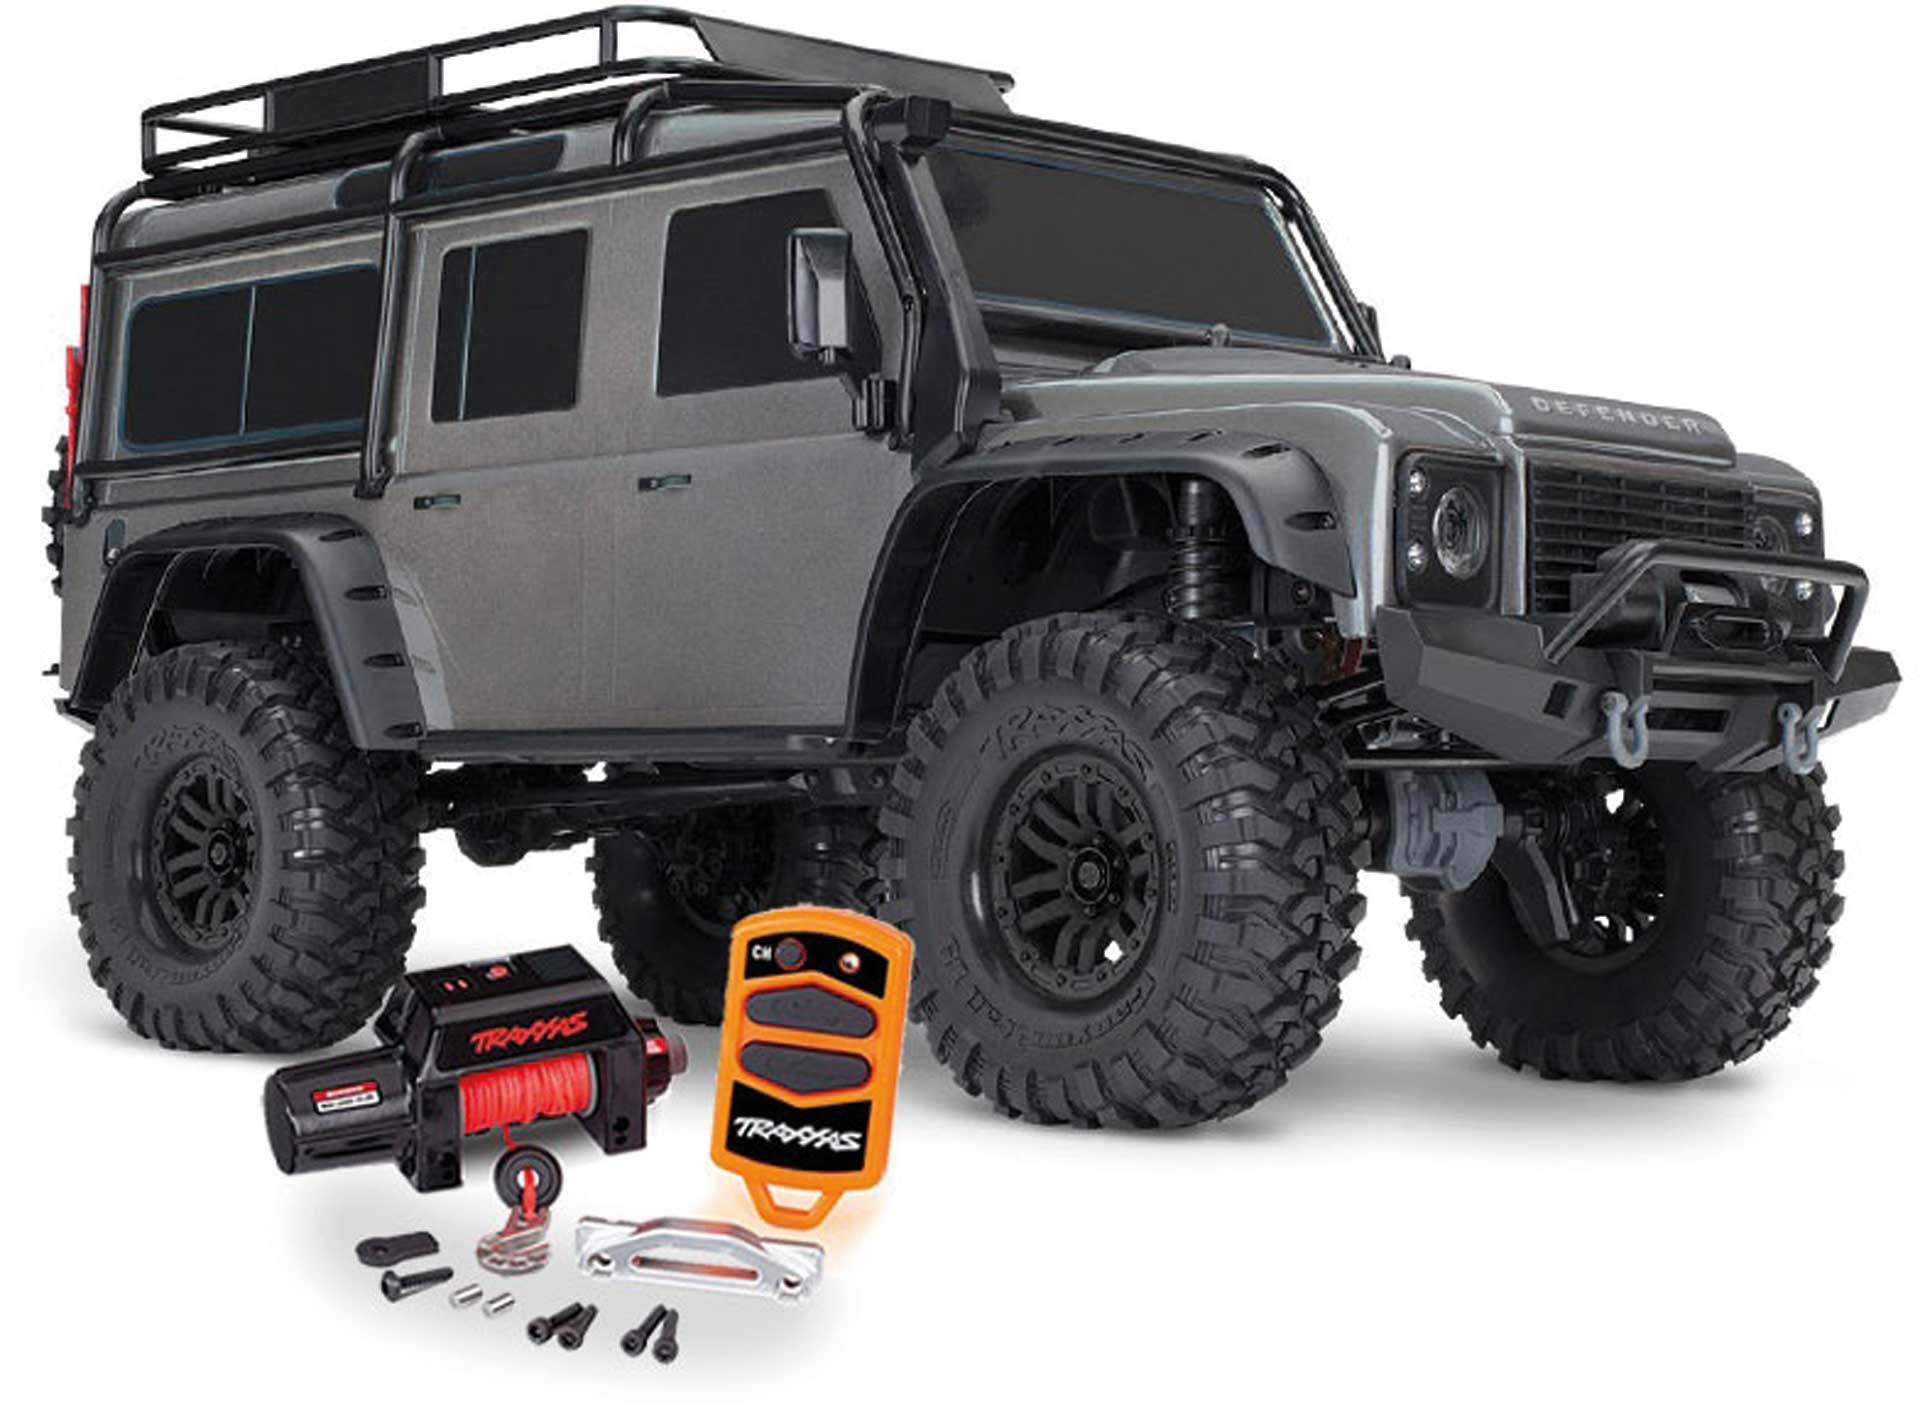 TRAXXAS TRX-4 Land Rover Defender Silber 1/10 4X4 RTR Scale Crawler Brushed mit Seilwinde